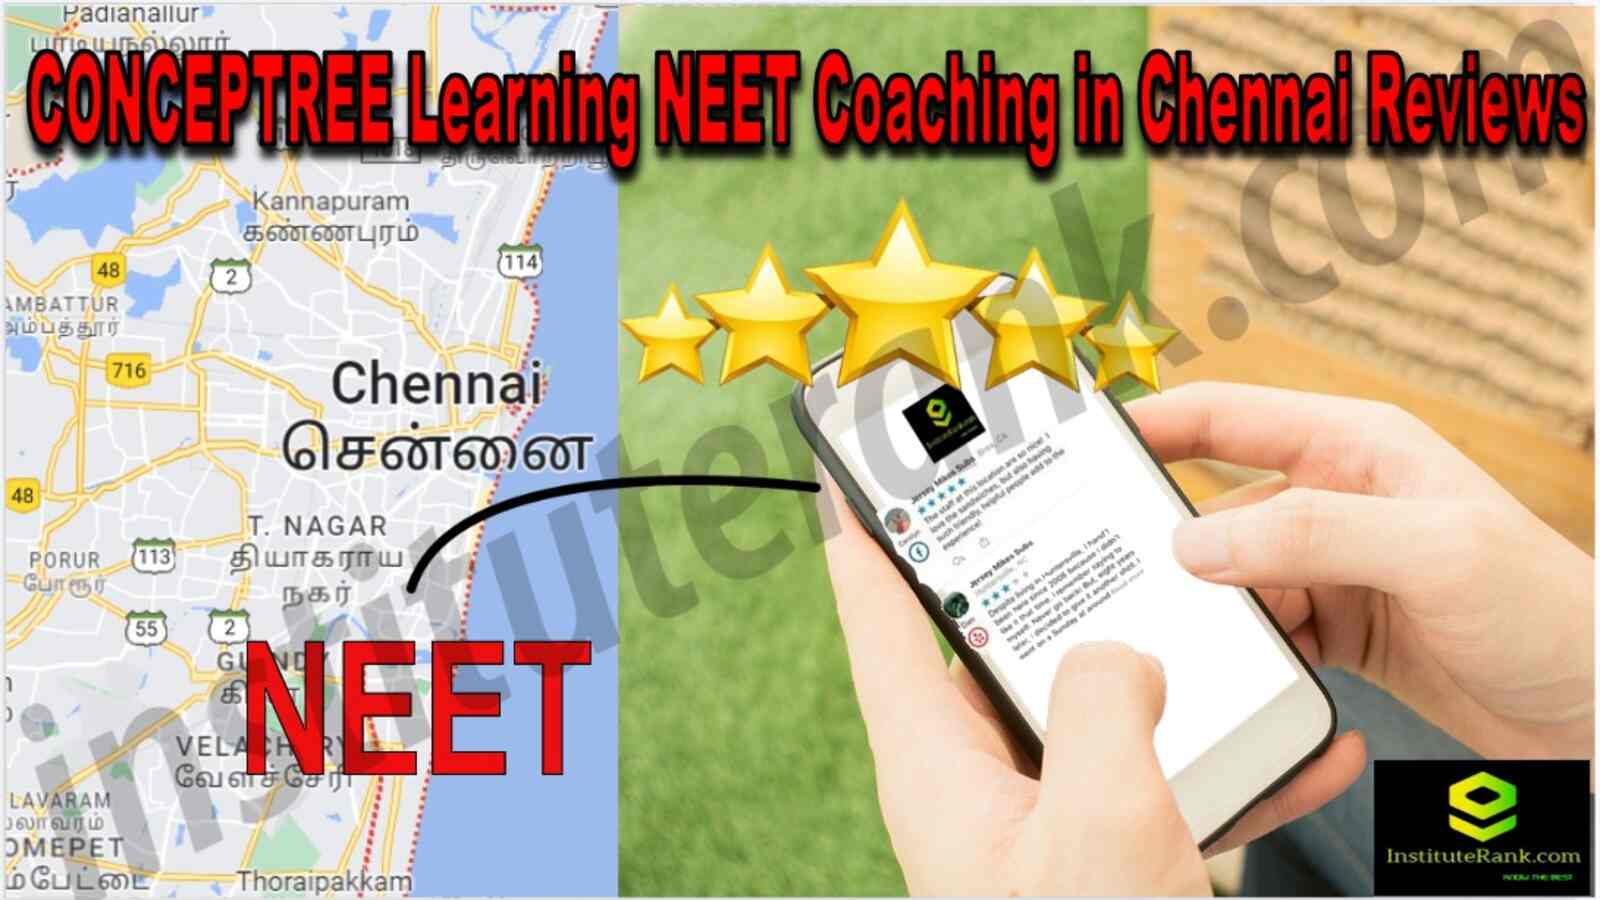 CONCEPTREE Learning NEET Coaching in Chennai Reviews